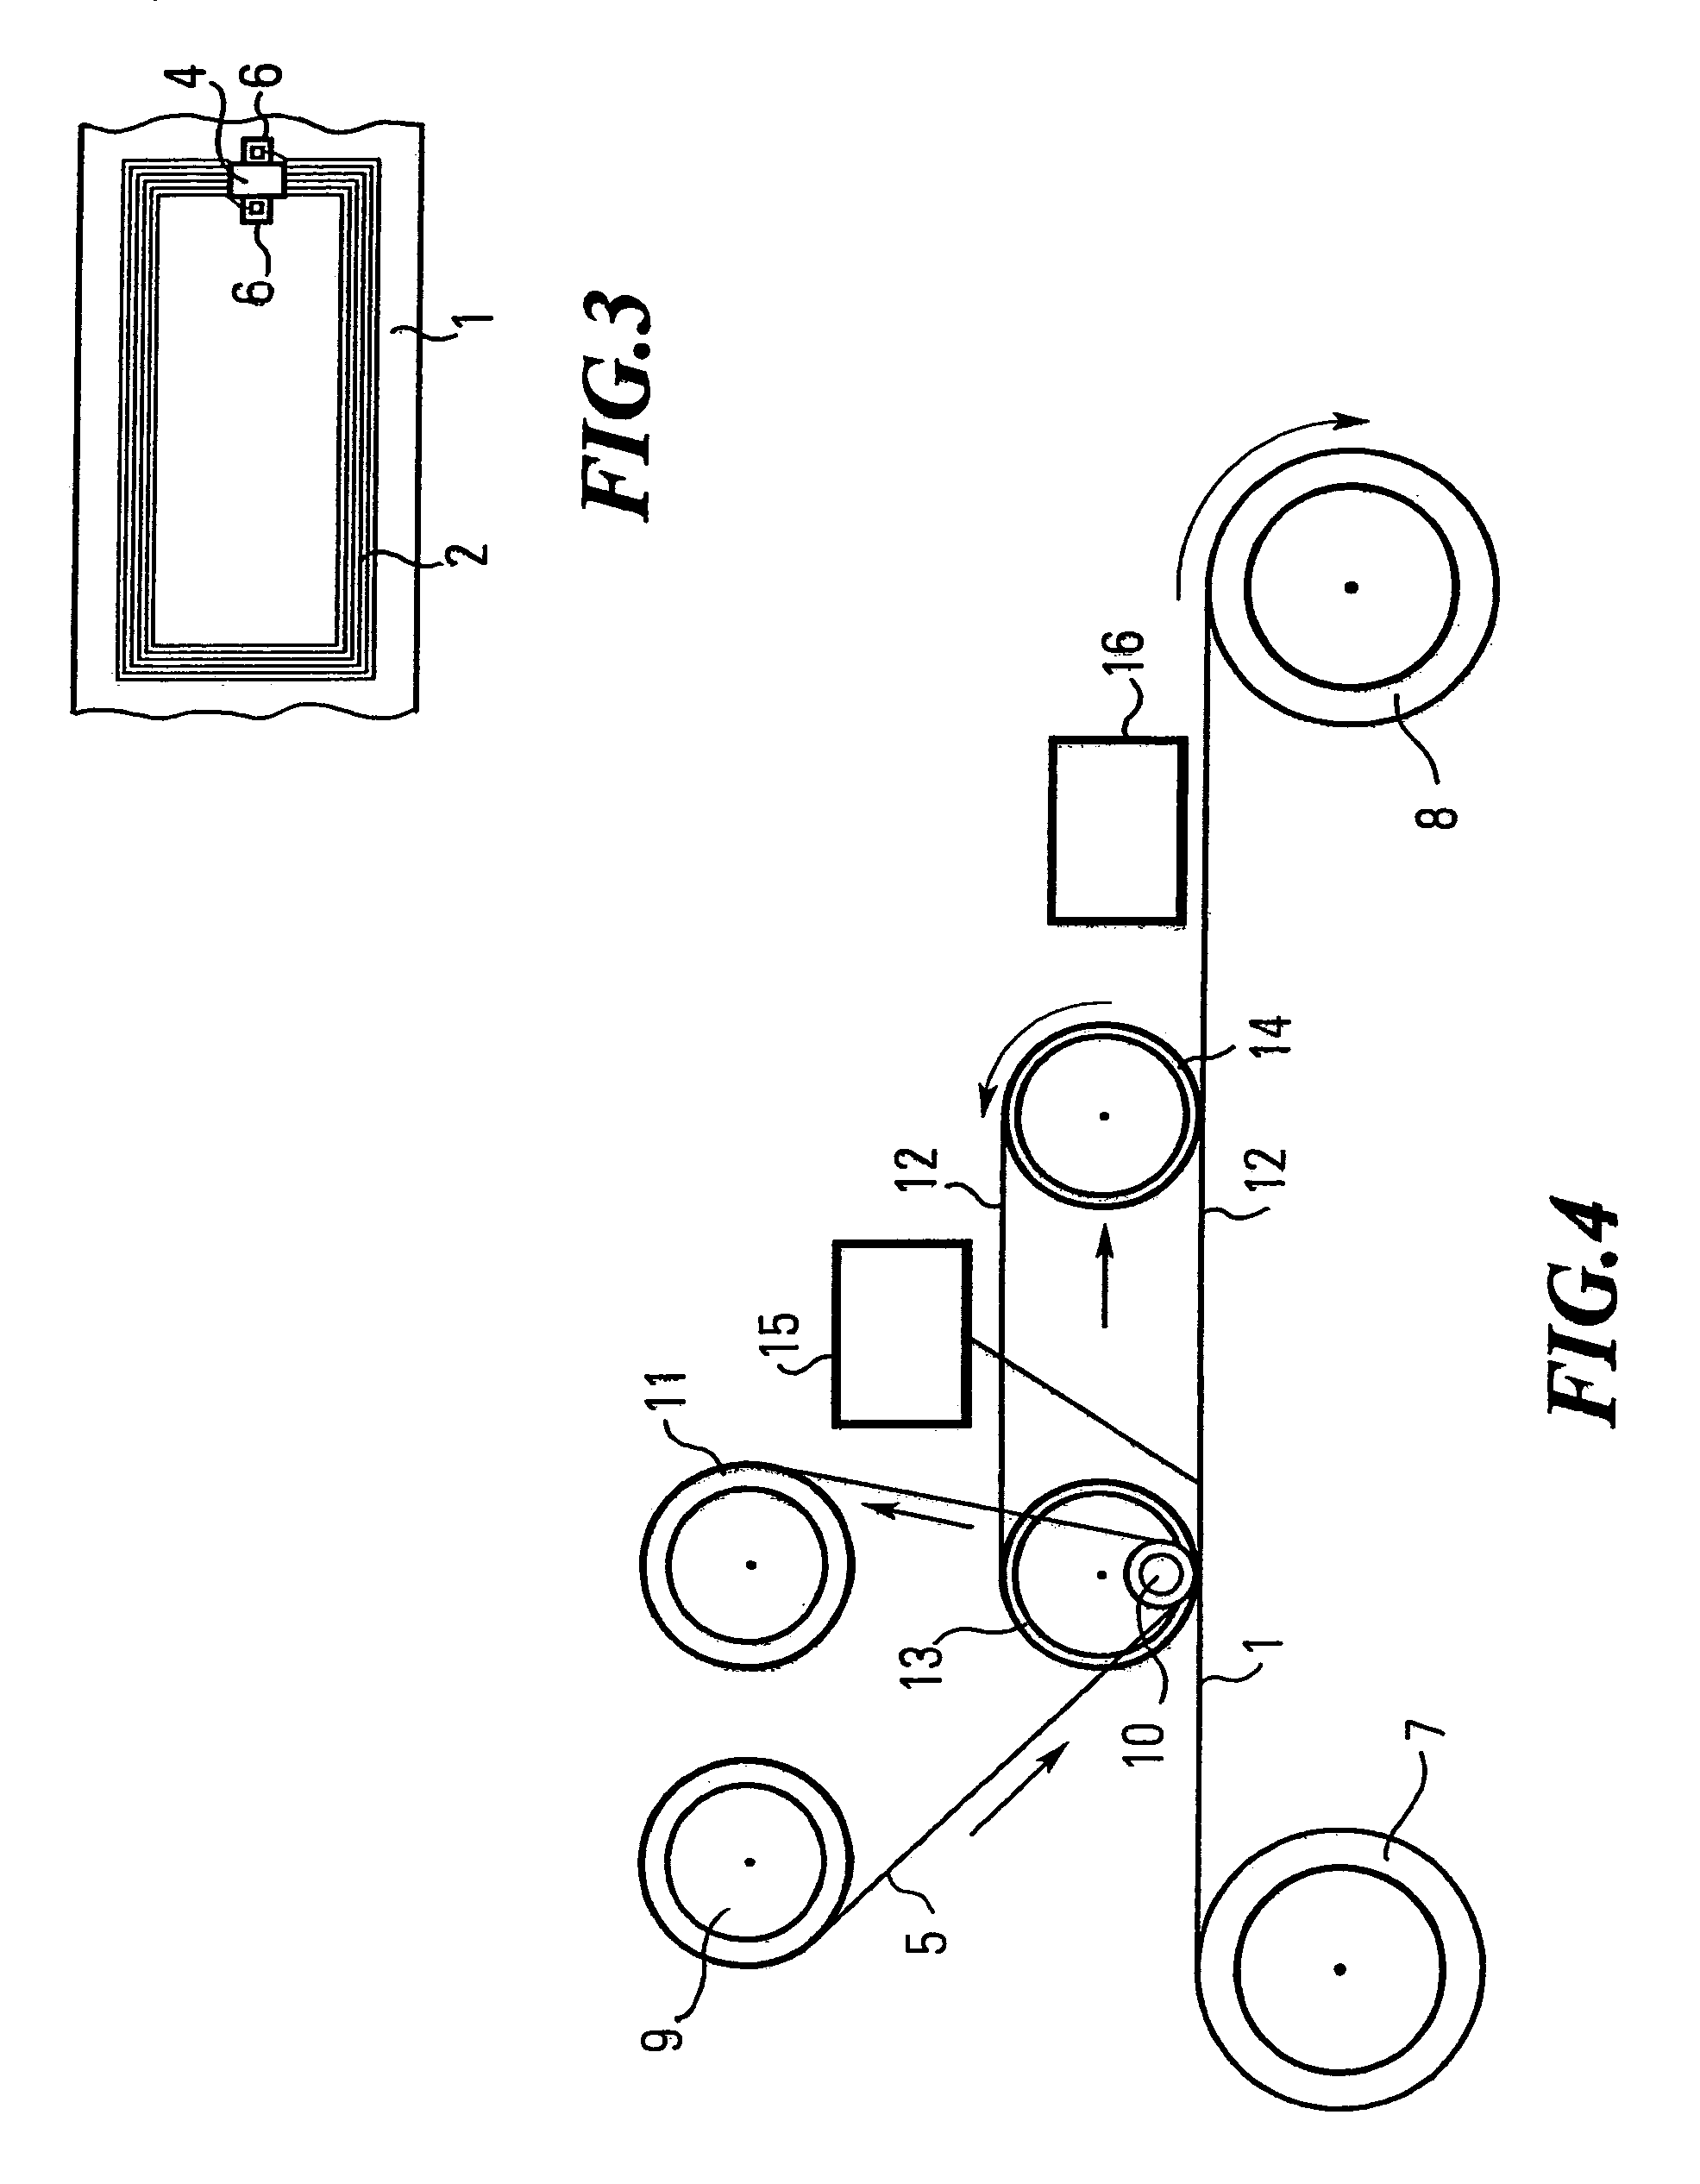 Method for connecting microchips to an antenna arranged on a support strip for producing a transponder